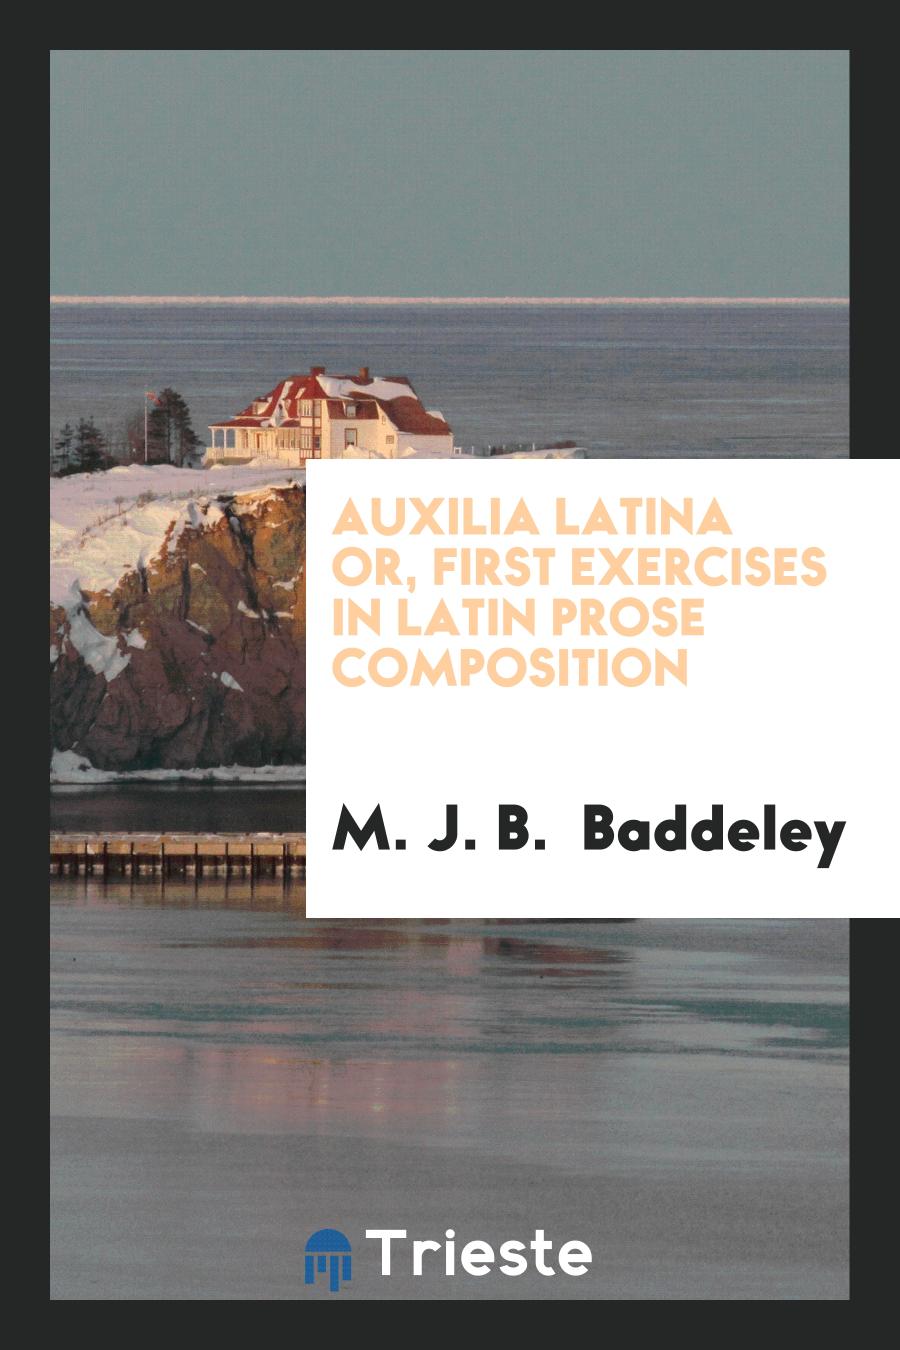 Auxilia Latina or, First Exercises in Latin Prose Composition